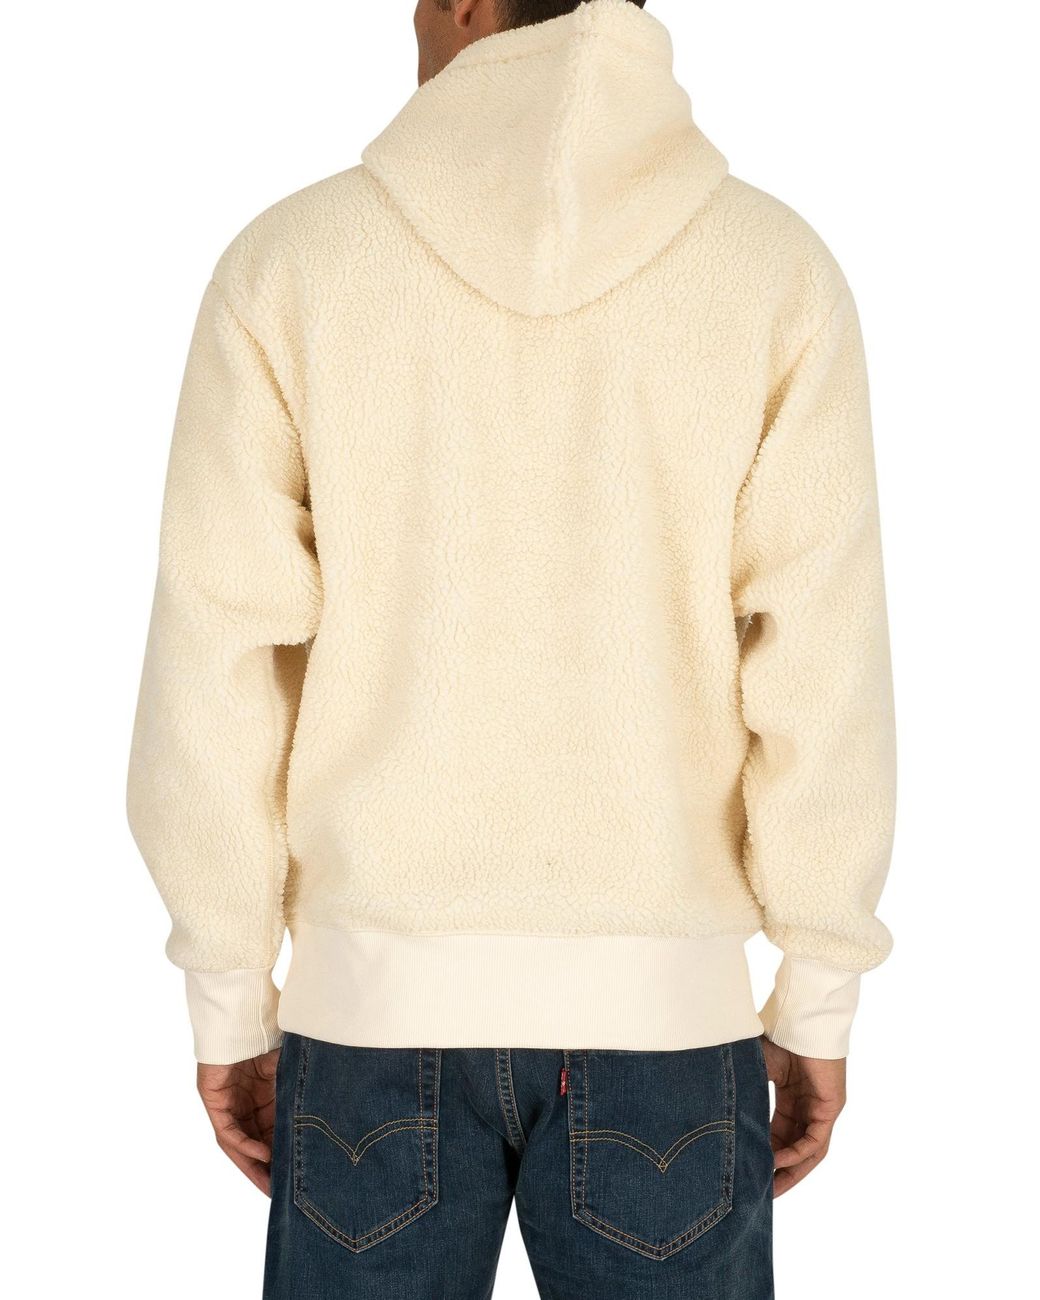 Timberland Sherpa Fleece Hoodie in White for Men | Lyst